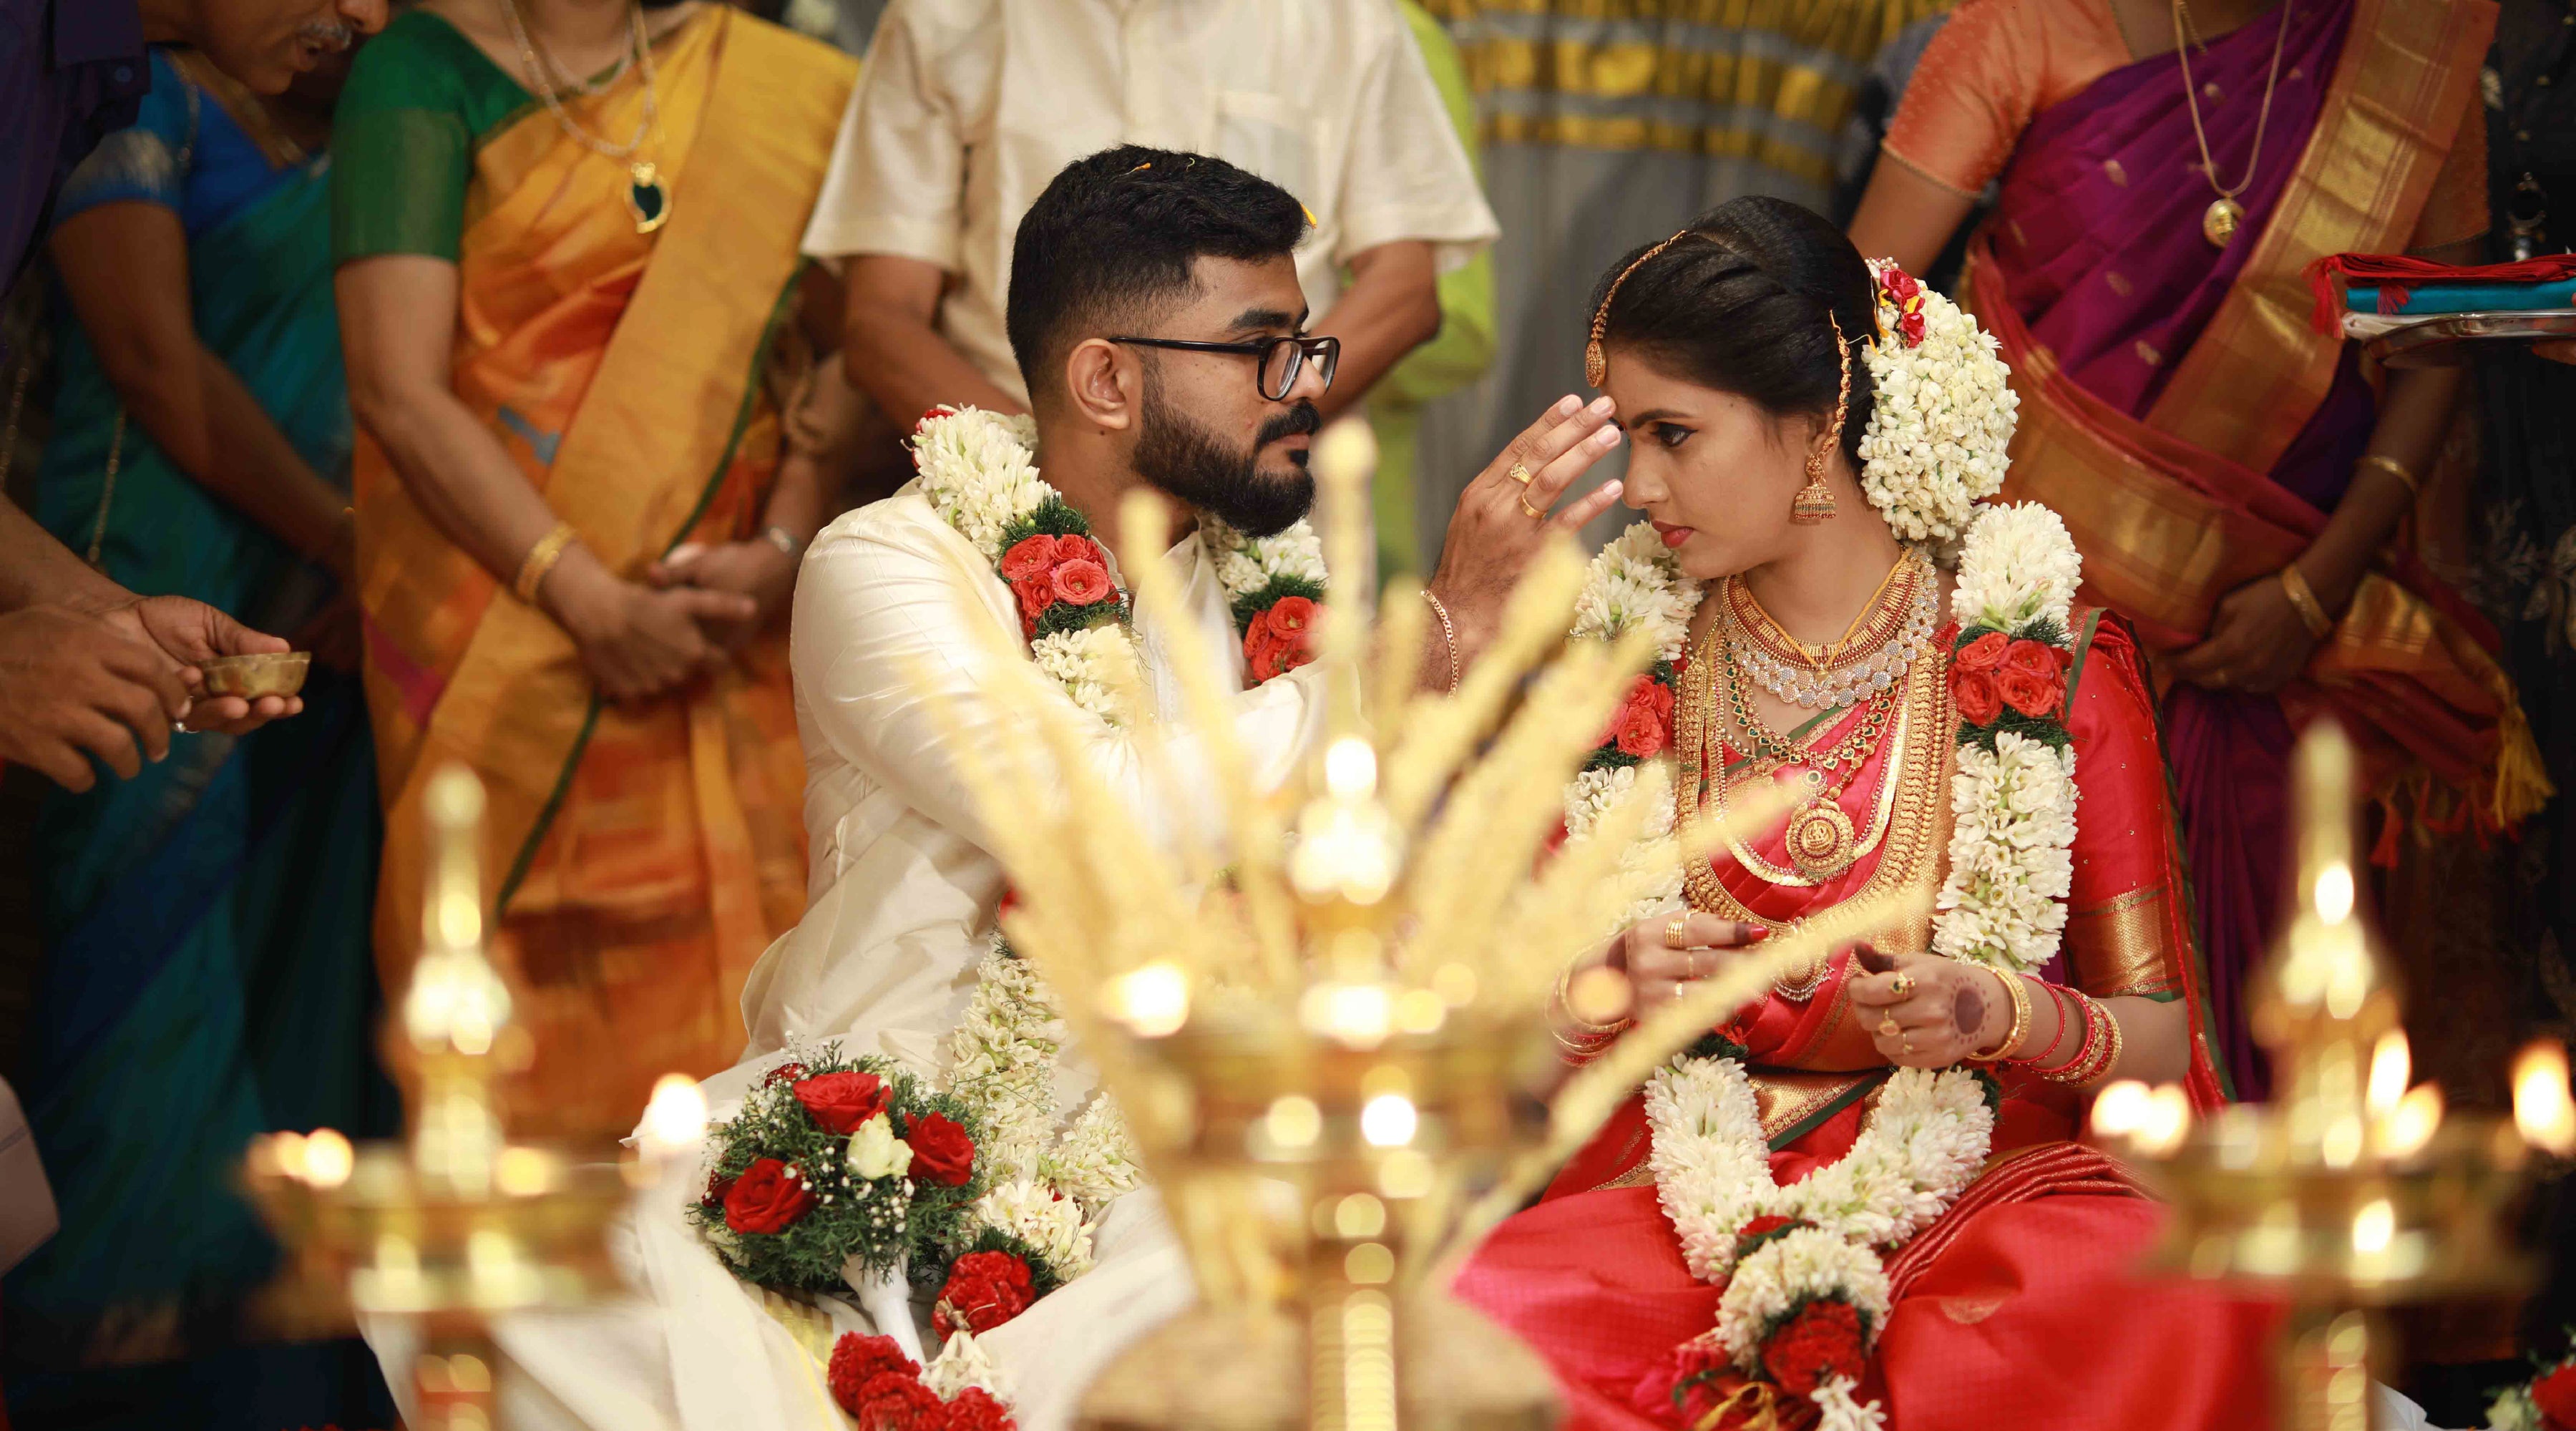 Almost A Guide For Your Wedding in Kerala, India | by Atheena Ben | Medium